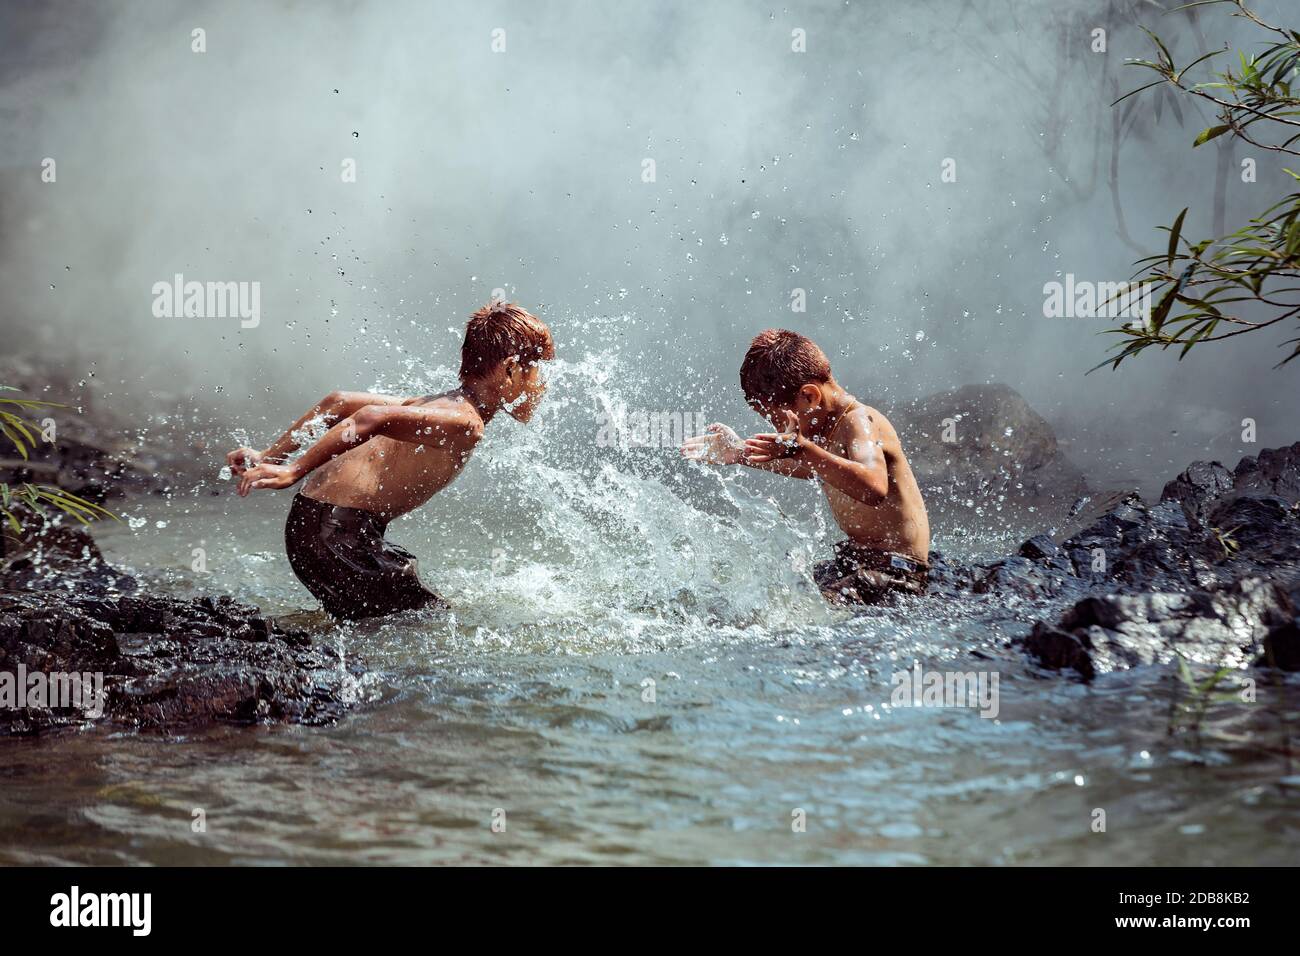 Two boys washing in a river, Thailand Stock Photo